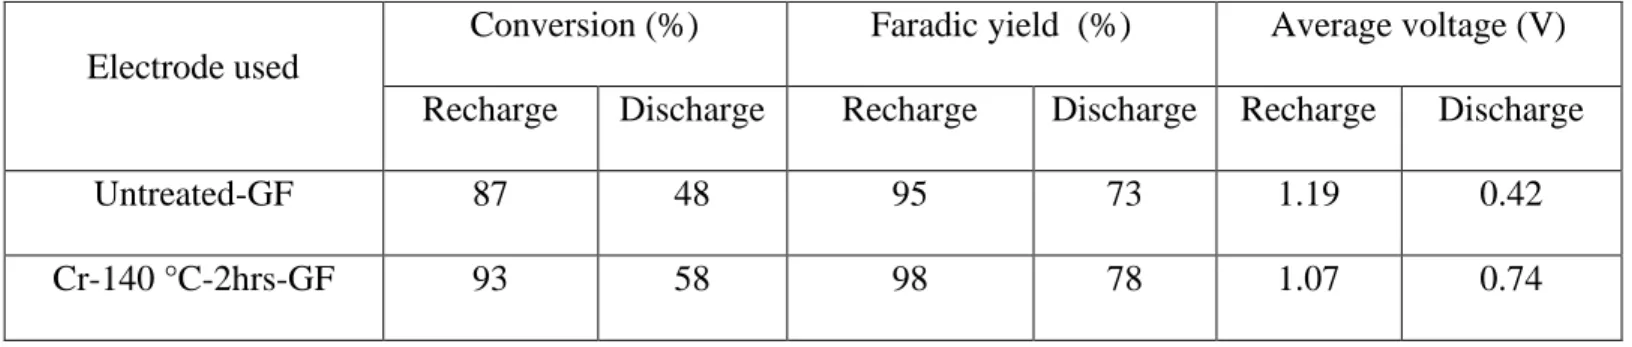 Table B.4:  Results of half-cell electrolysis using untreated-GF and Cr-140 °C-2hrs-GF electrode